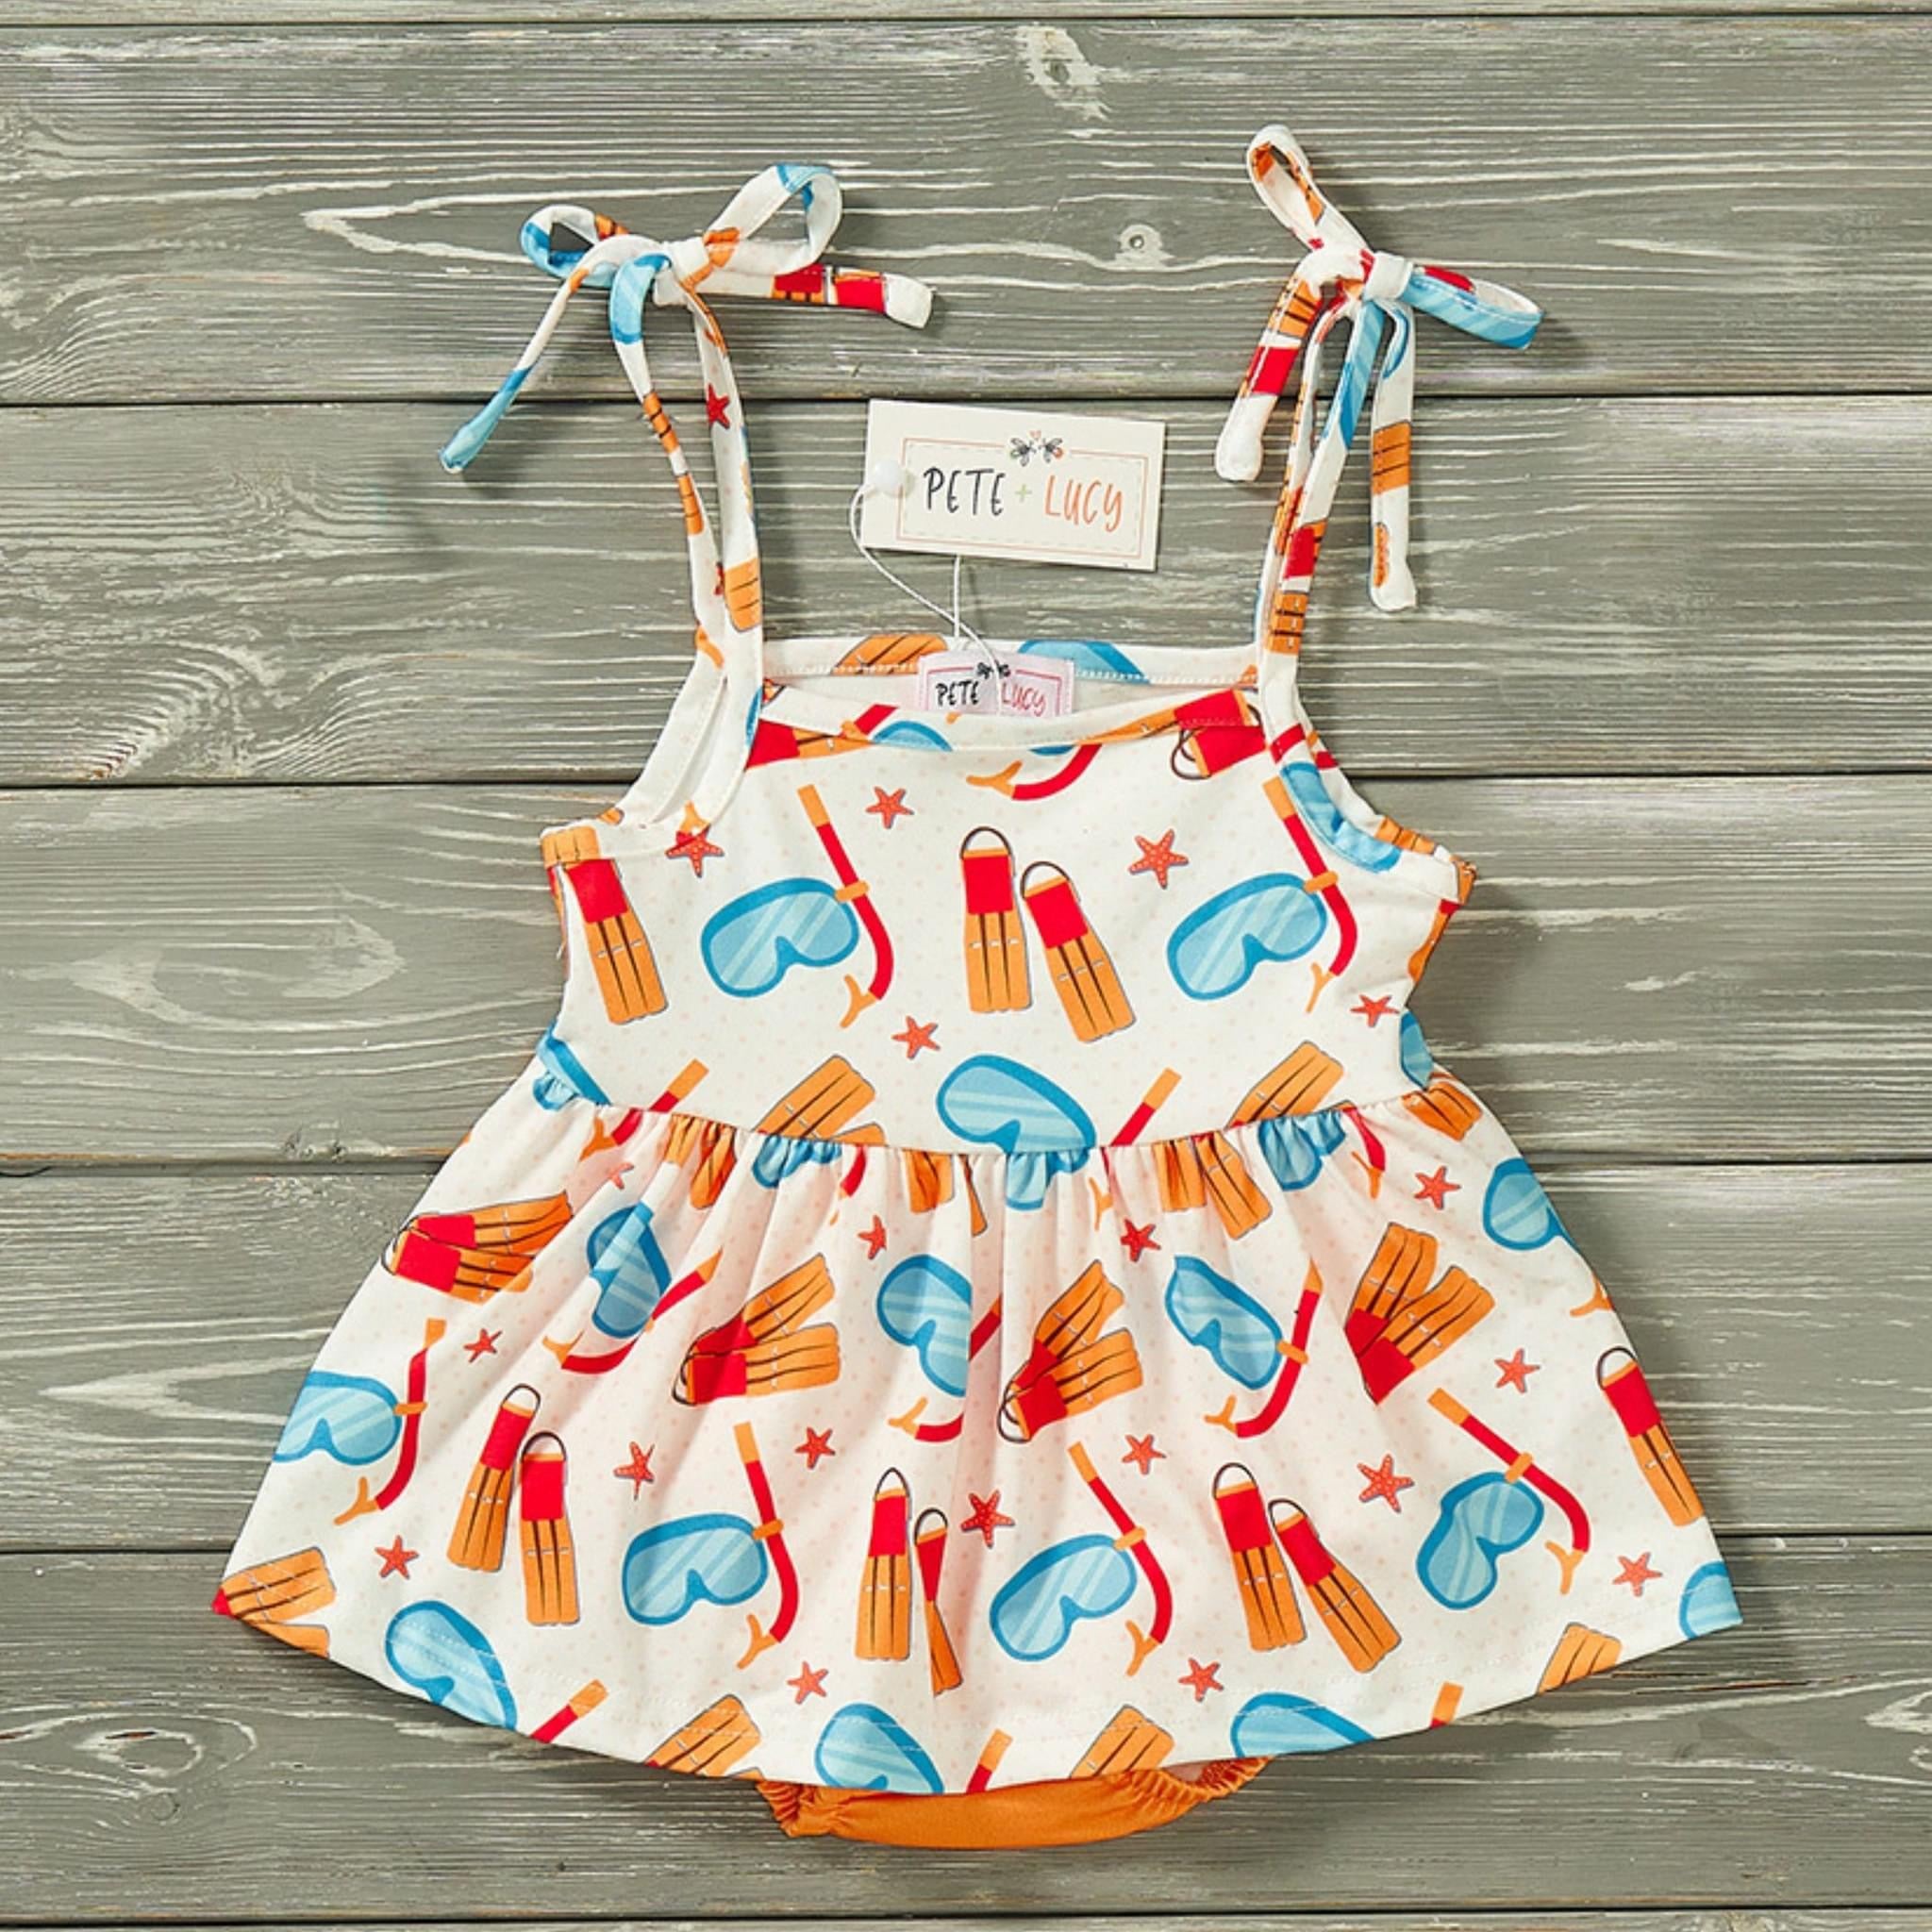 Snorkel Time Baby Romper by Pete and Lucy